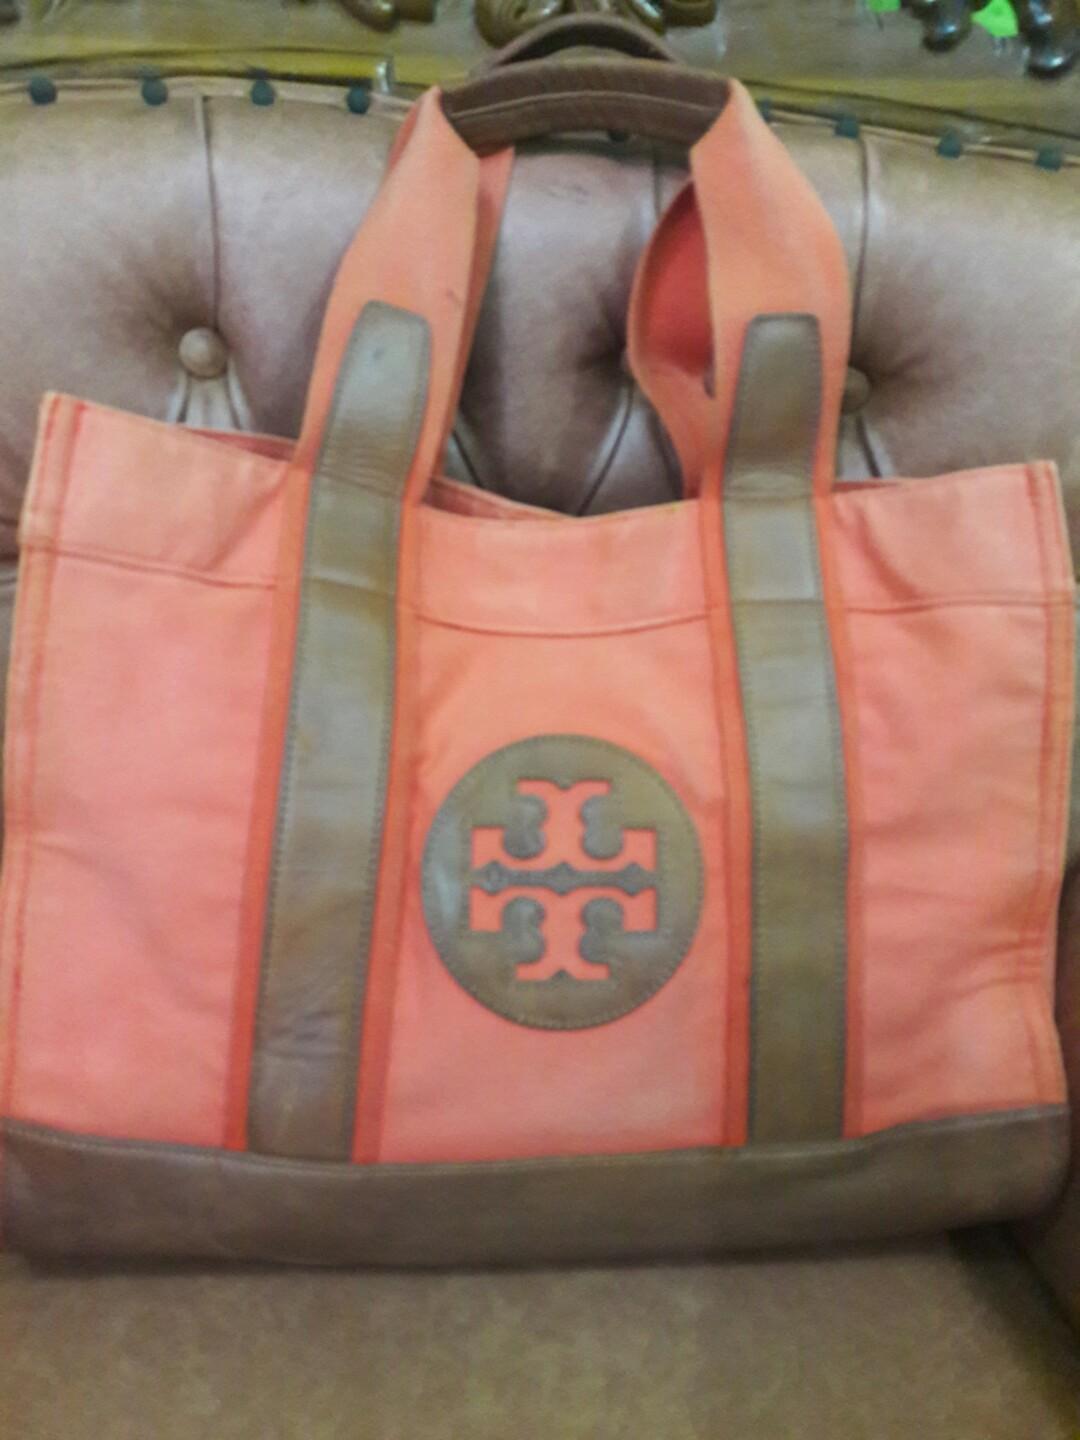 Tory Burch made in china